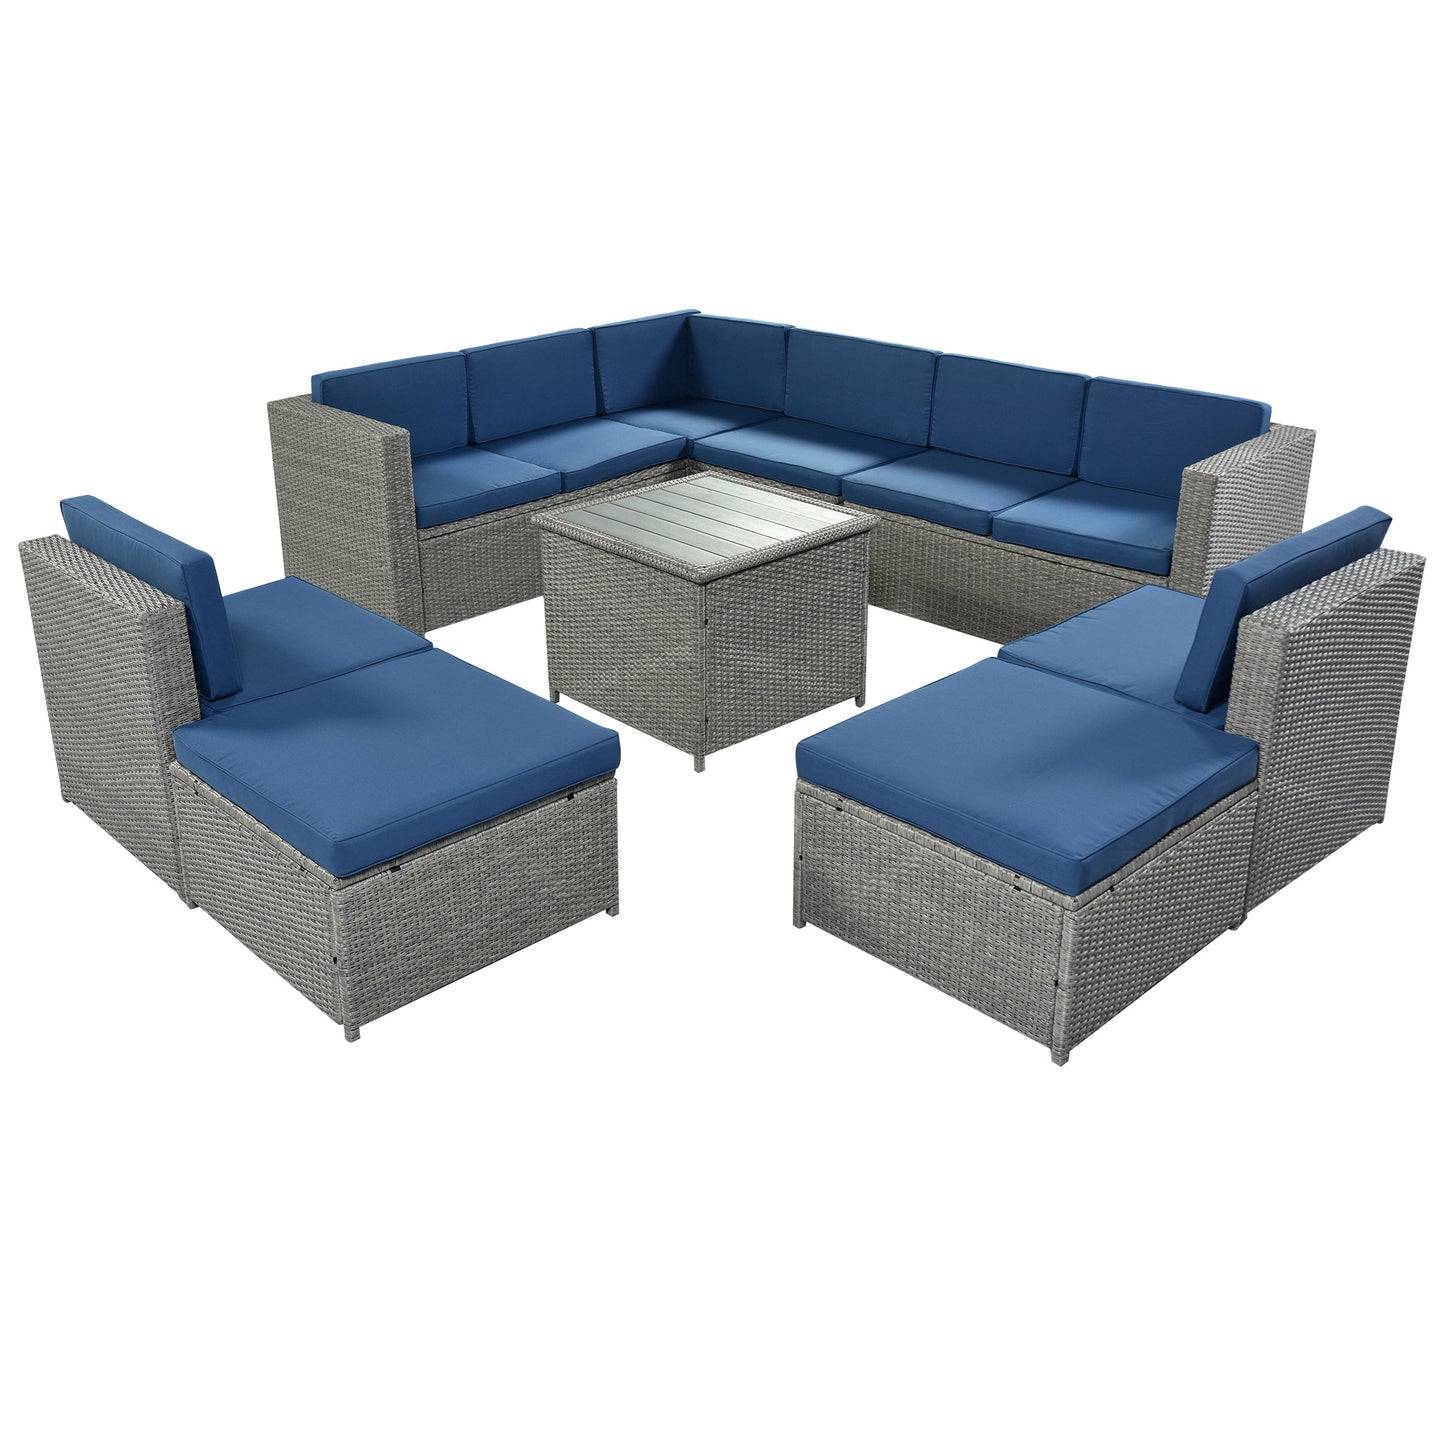 9 Piece Rattan Outdoor Patio Sectional Seating Group with Cushions and Ottoman